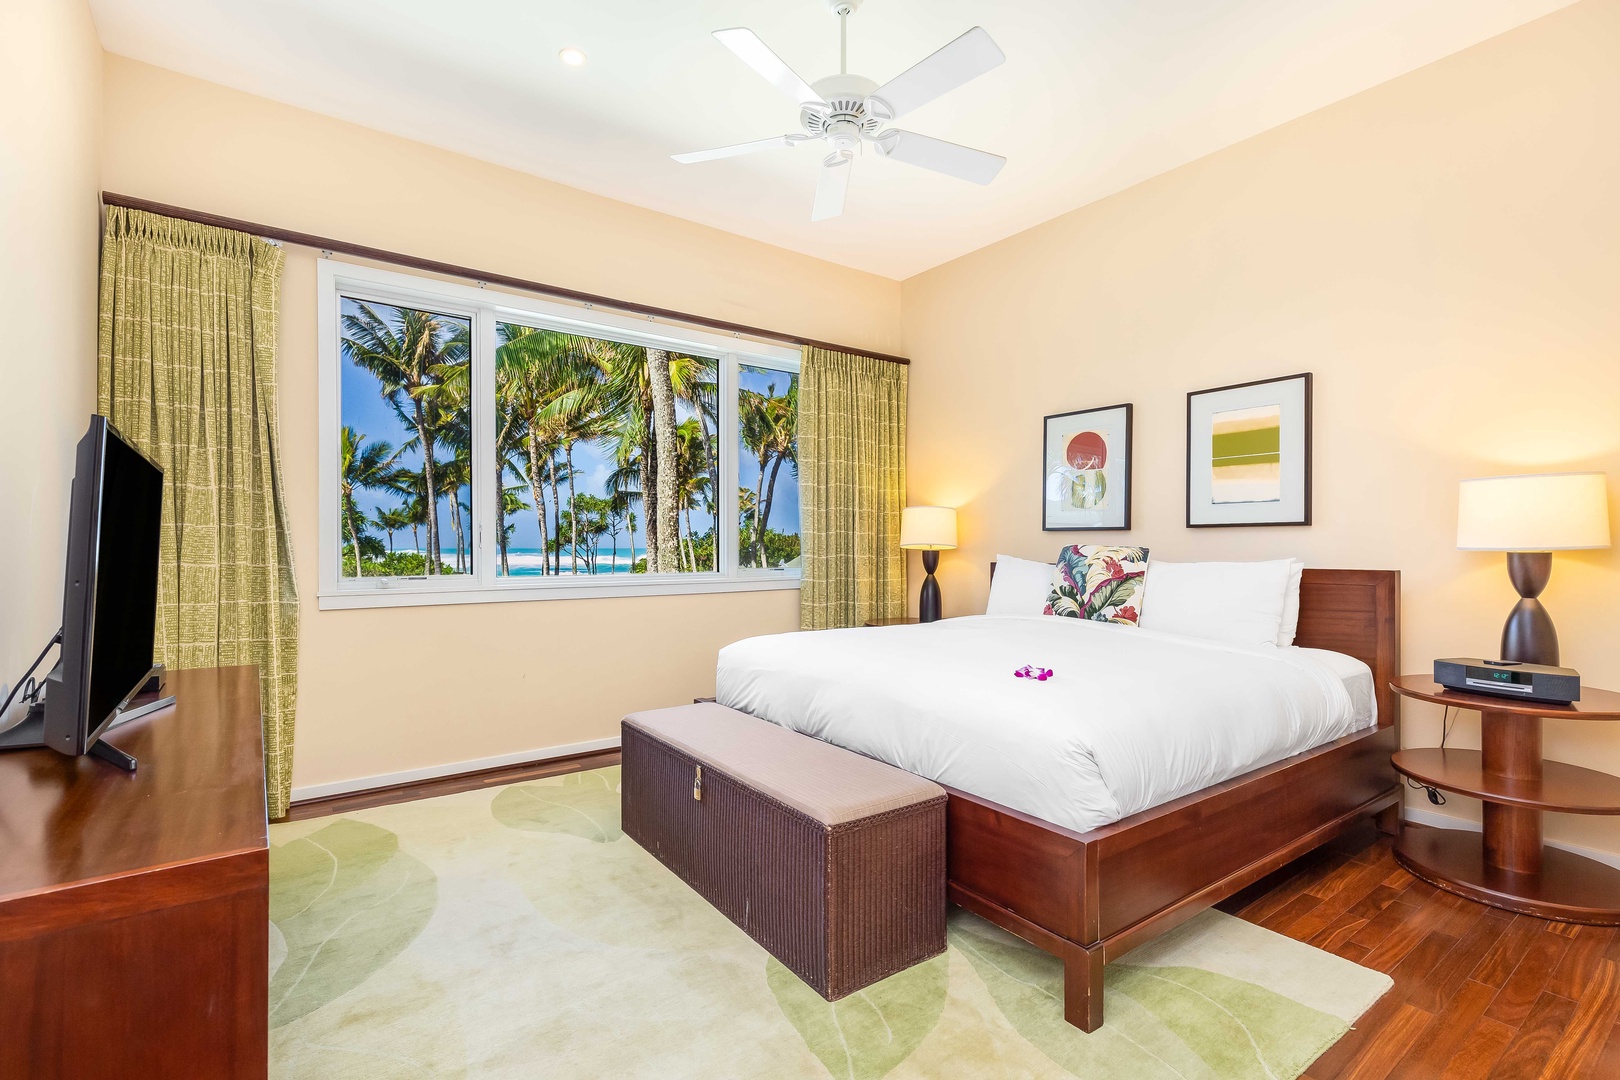 Kahuku Vacation Rentals, Turtle Bay Villas 311 - Walking into the spacious primary suite immediately whisks you away to a relaxing sanctuary with its King-size bed, walk-in closet